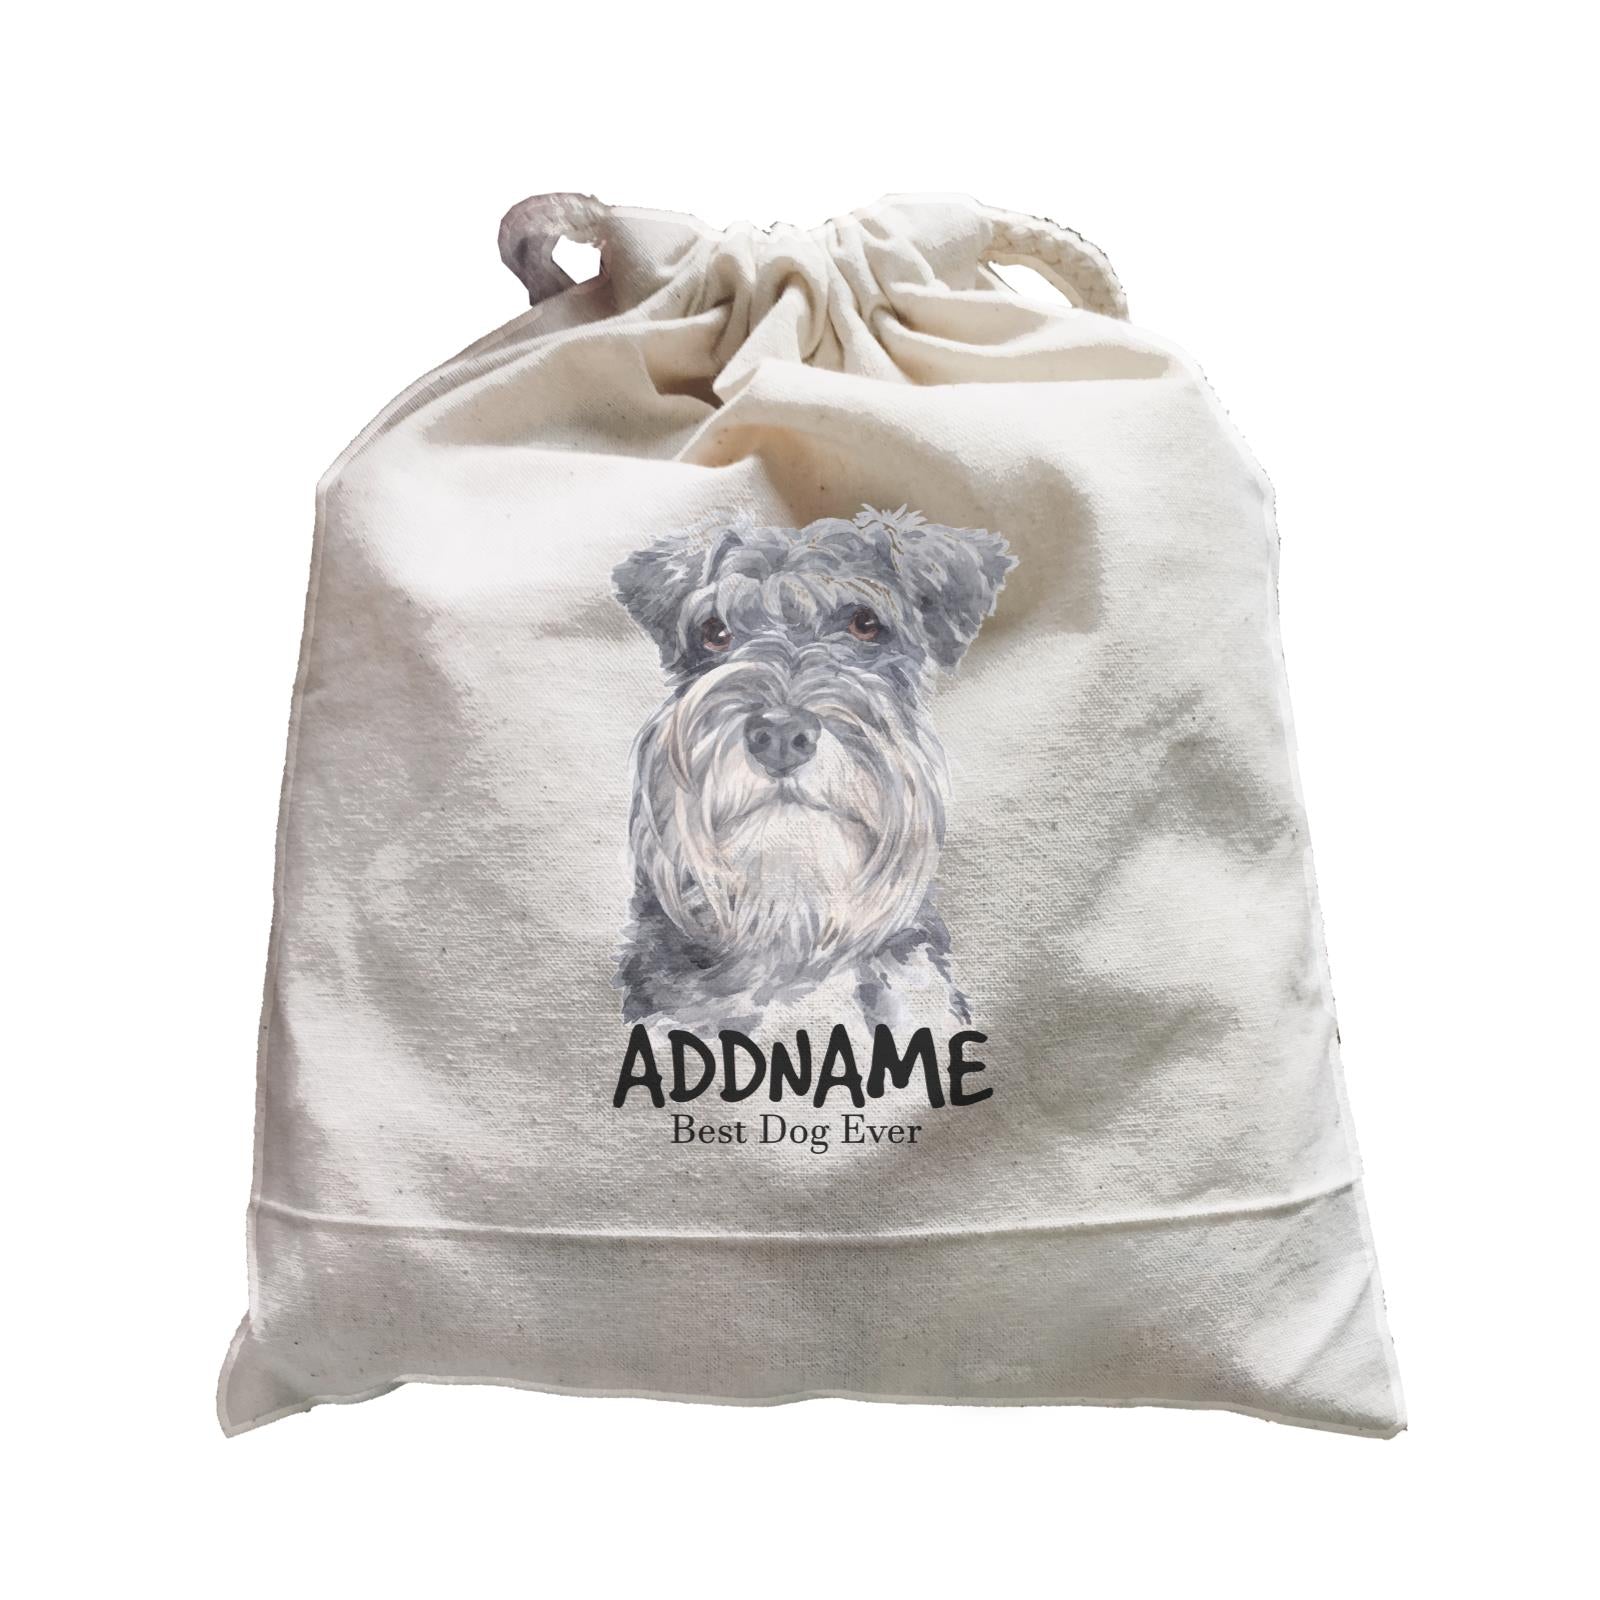 Watercolor Dog Schnauzer Long Hair Best Dog Ever Addname Satchel